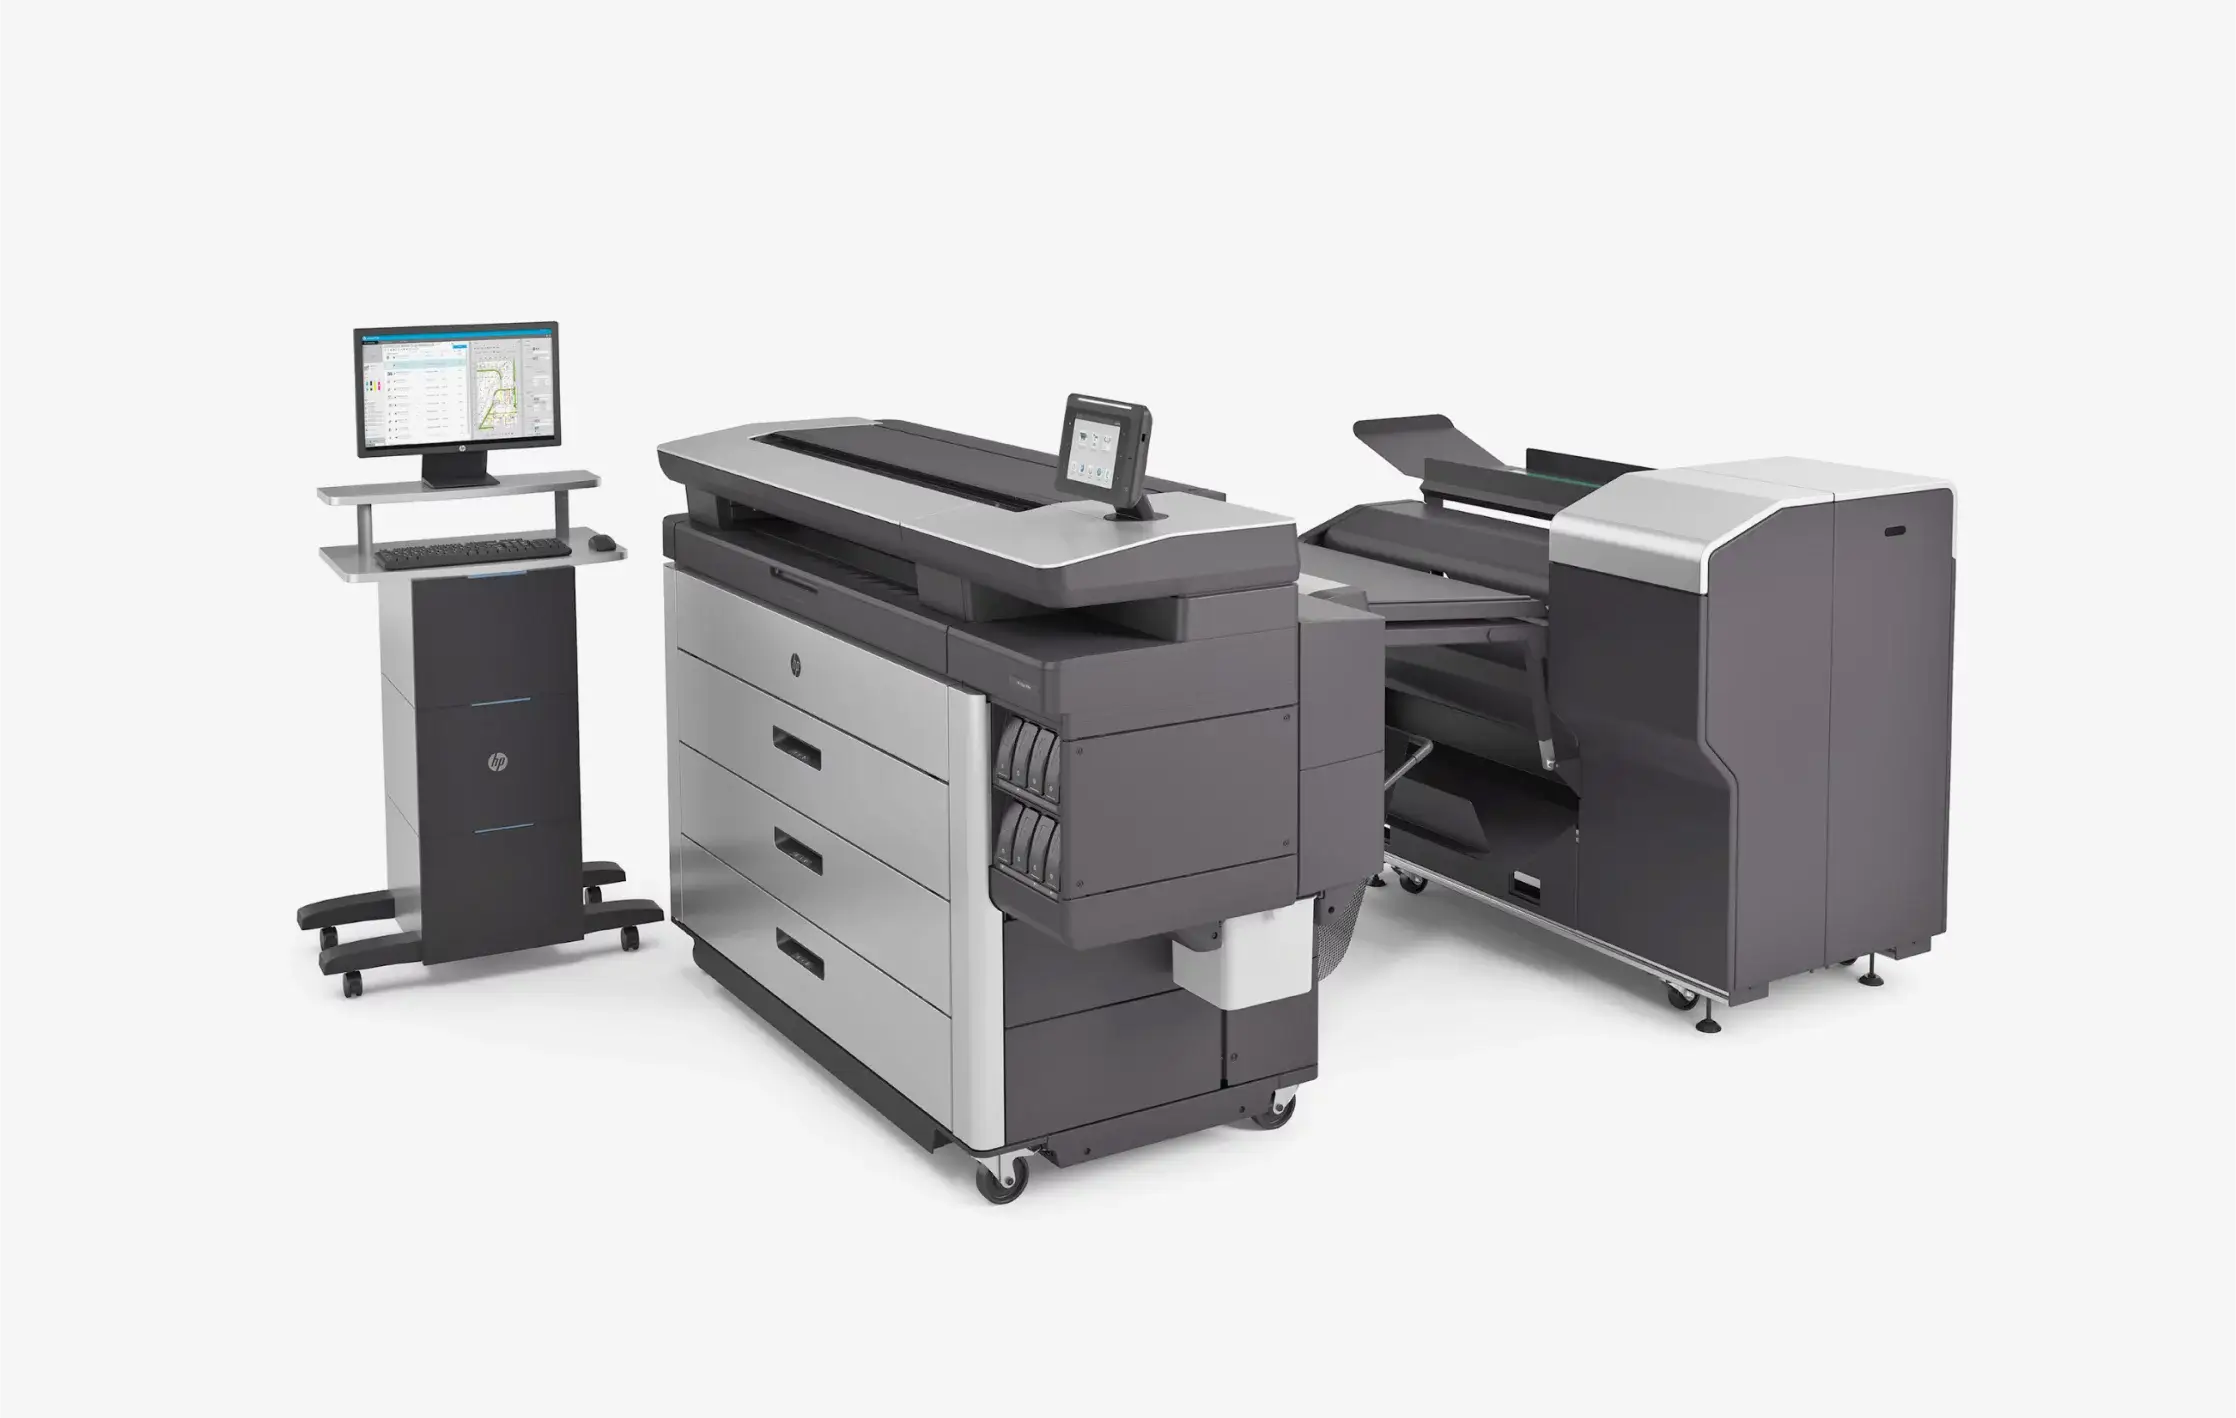 Industrial Design of a printer by Nacar Design for HP